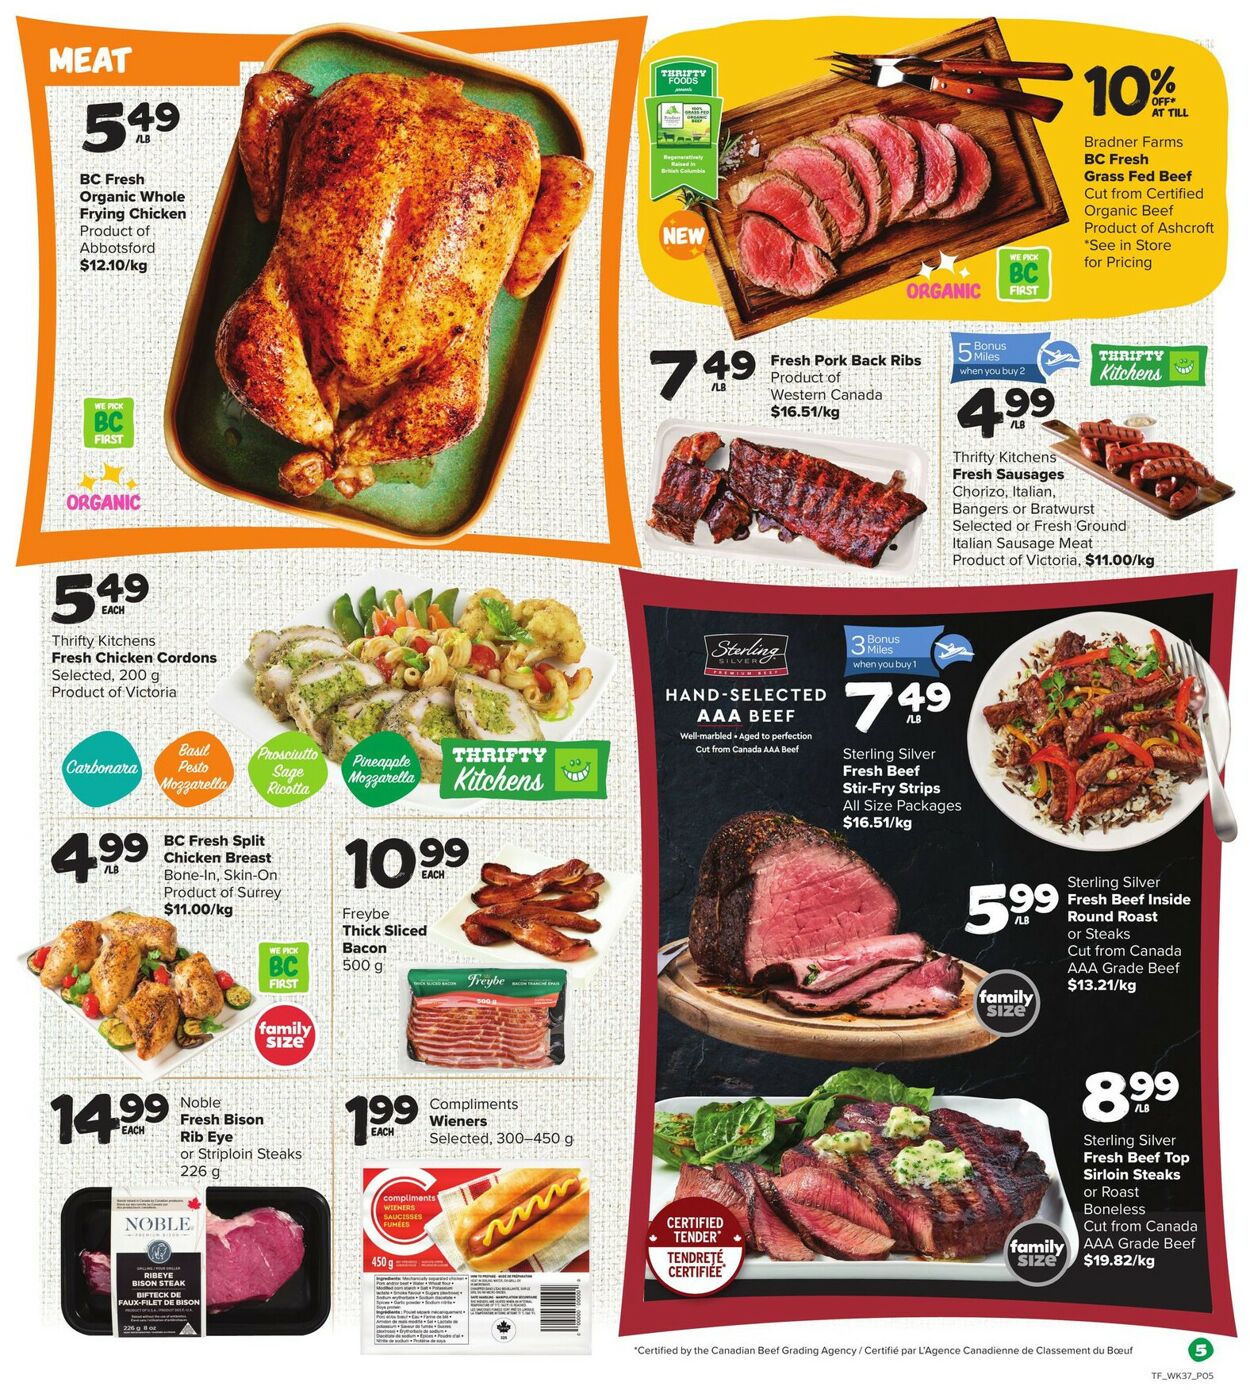 Thrifty Foods Flyer from 01/12/2023